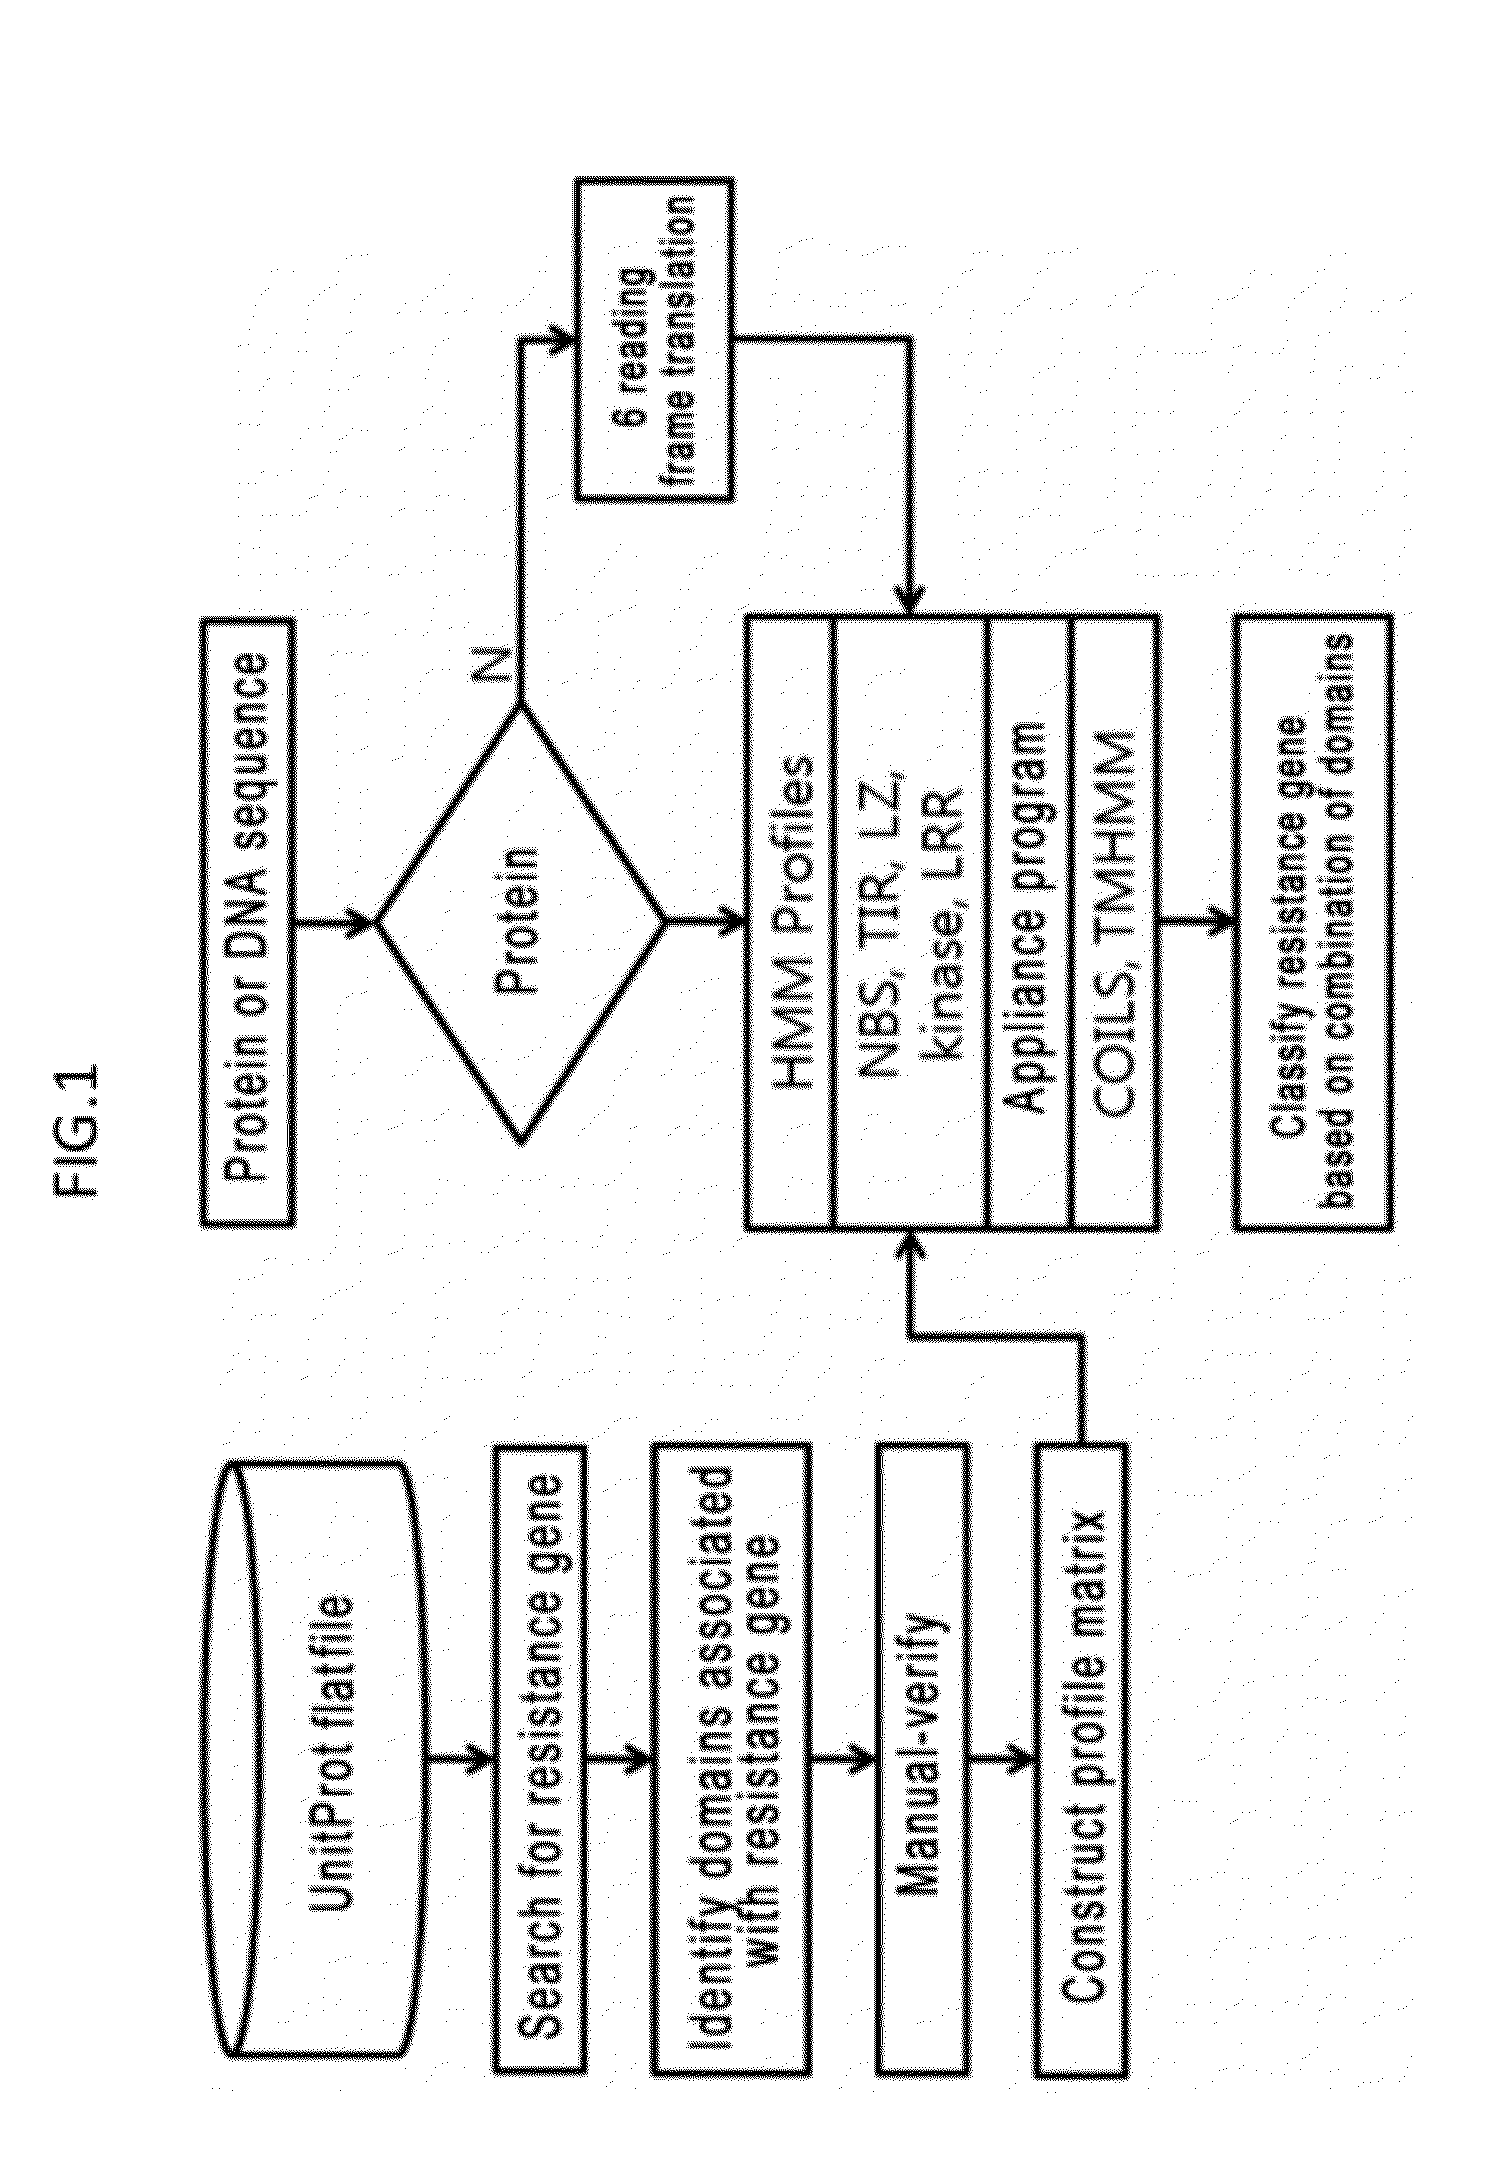 System and method for identifying and classifying resistance genes of plant using hidden marcov model